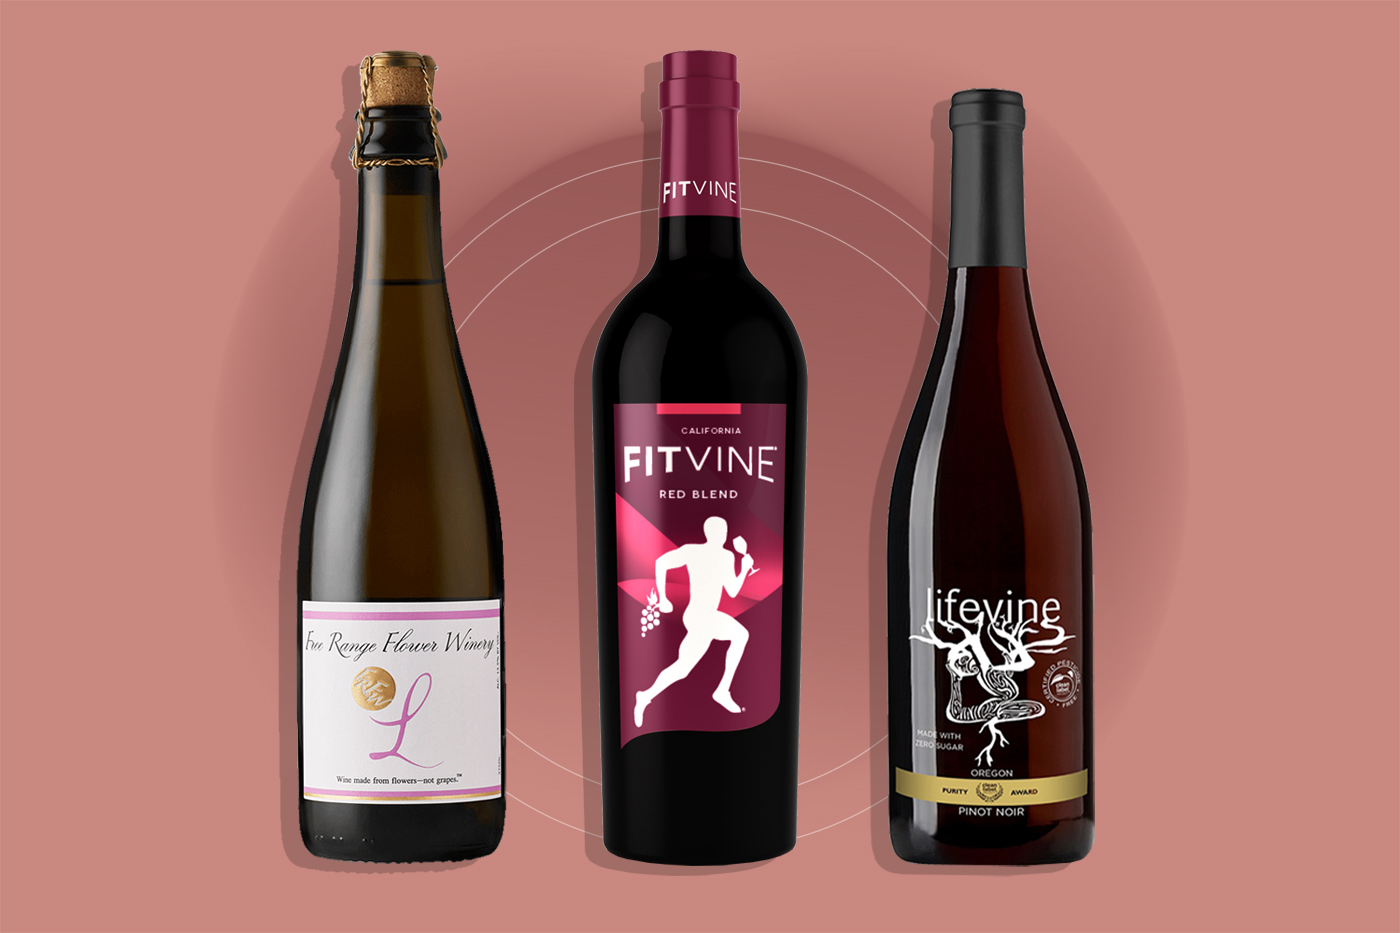 The Benefits of Drinking Natural Wine